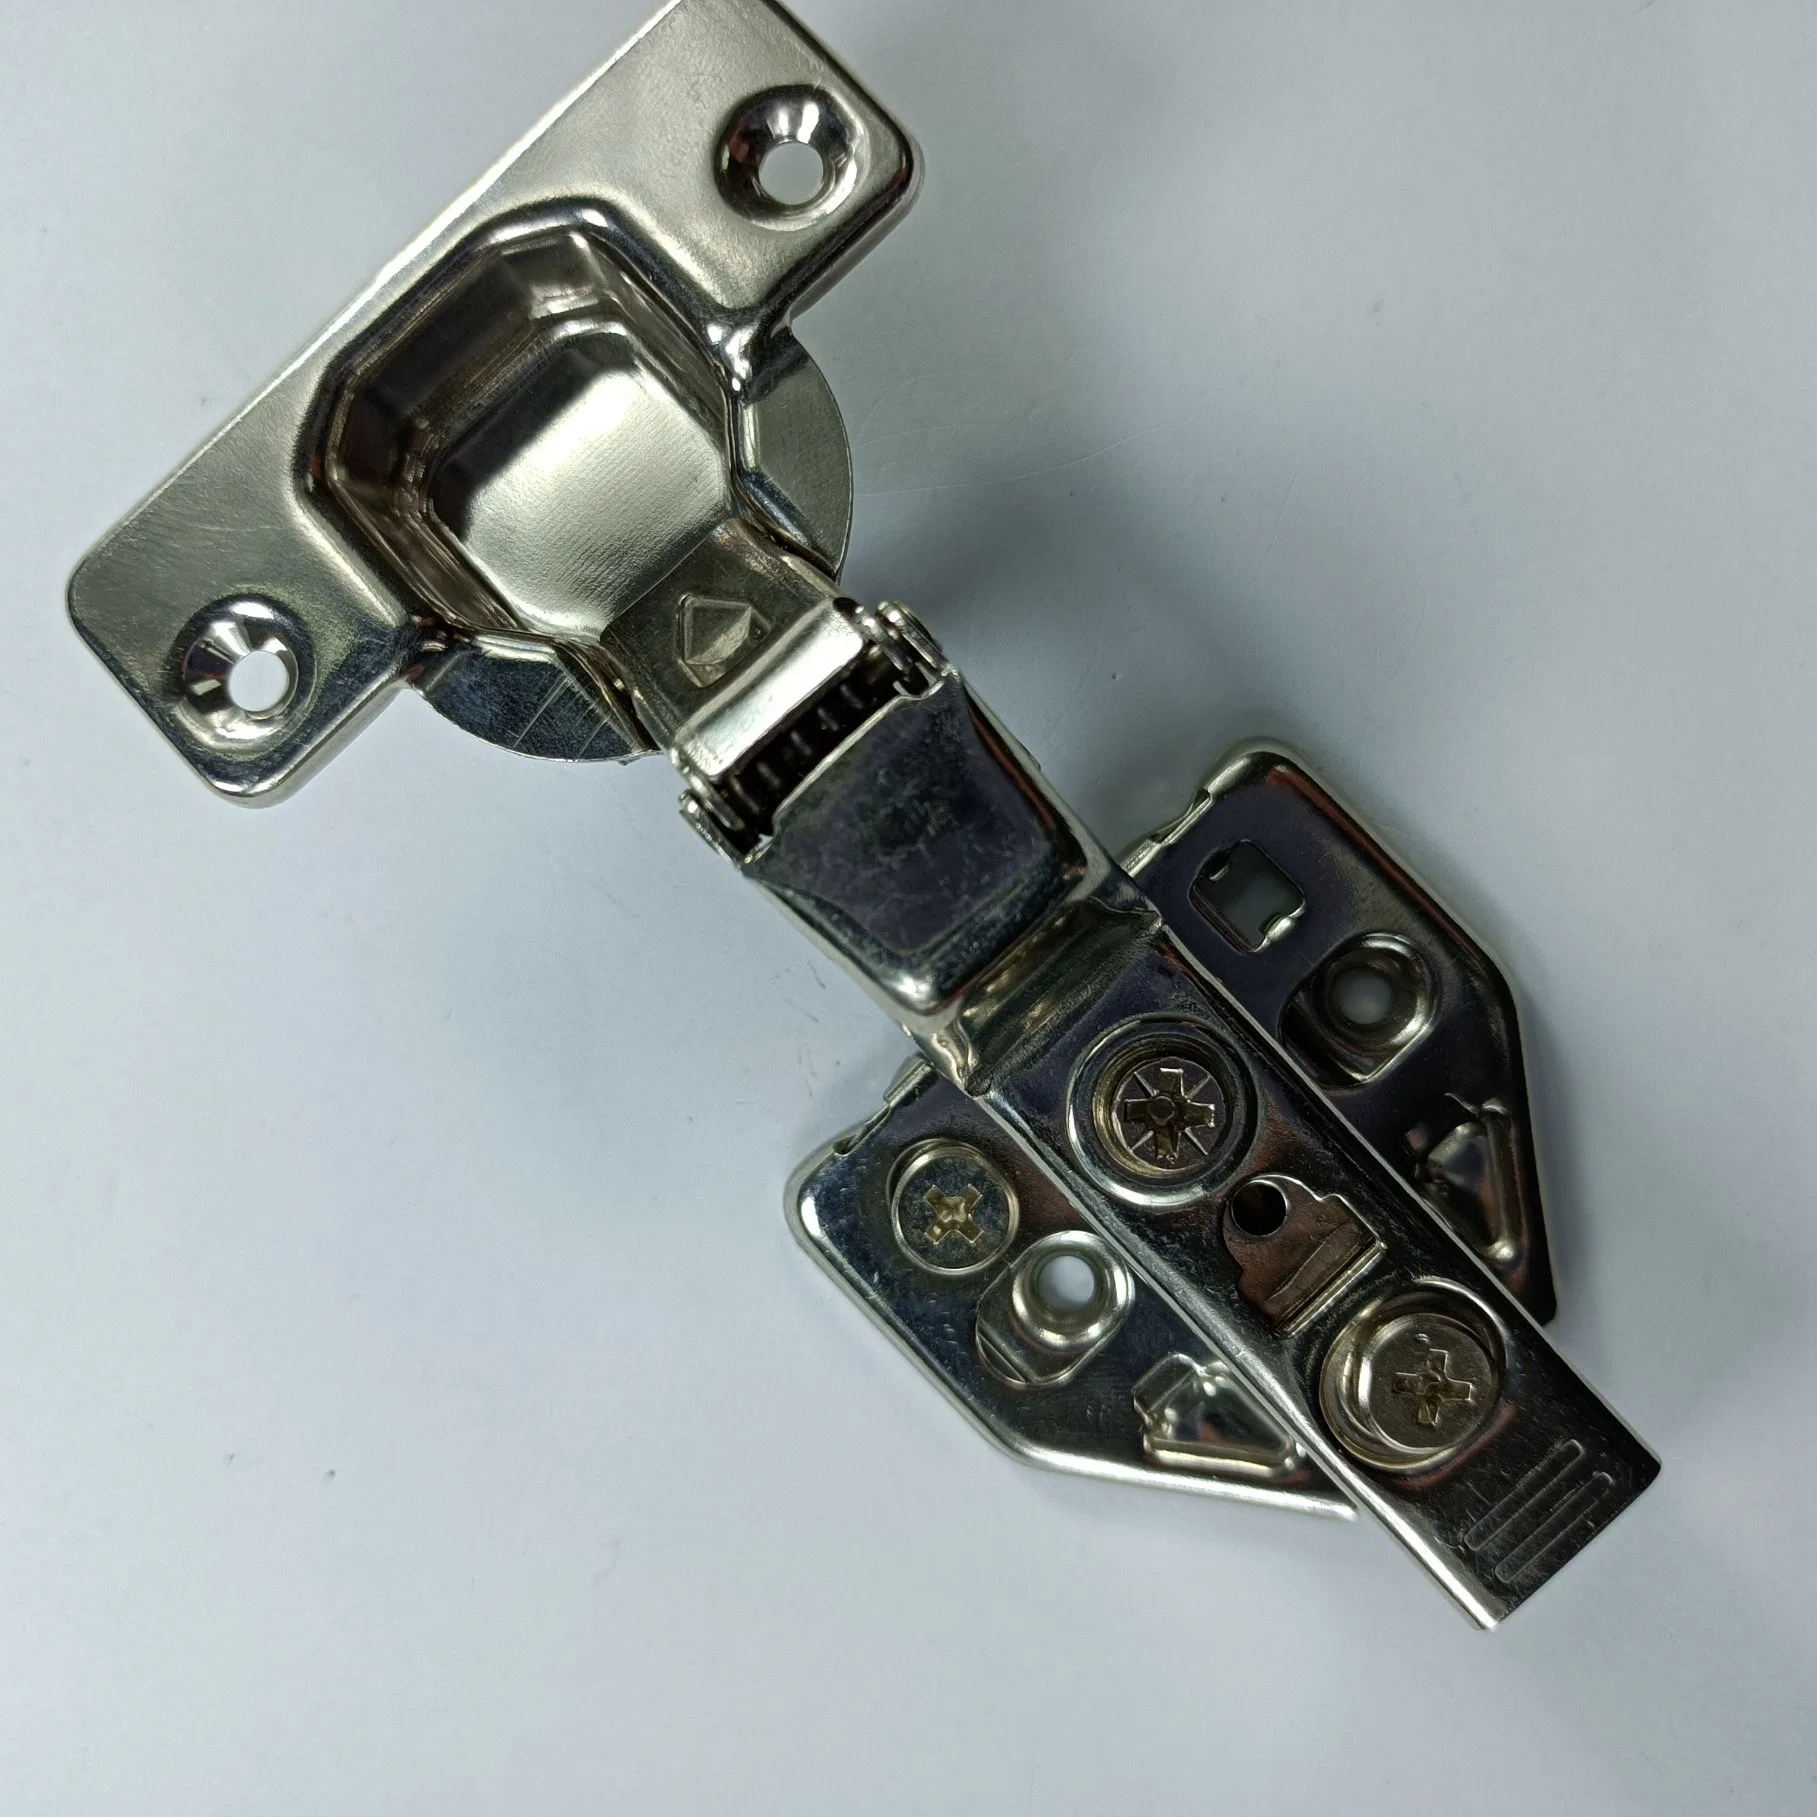 Hardware Hinges for Kitchen Cabinets, Storage Cabinets, Wooden Cabinet Doors and Other Furniture